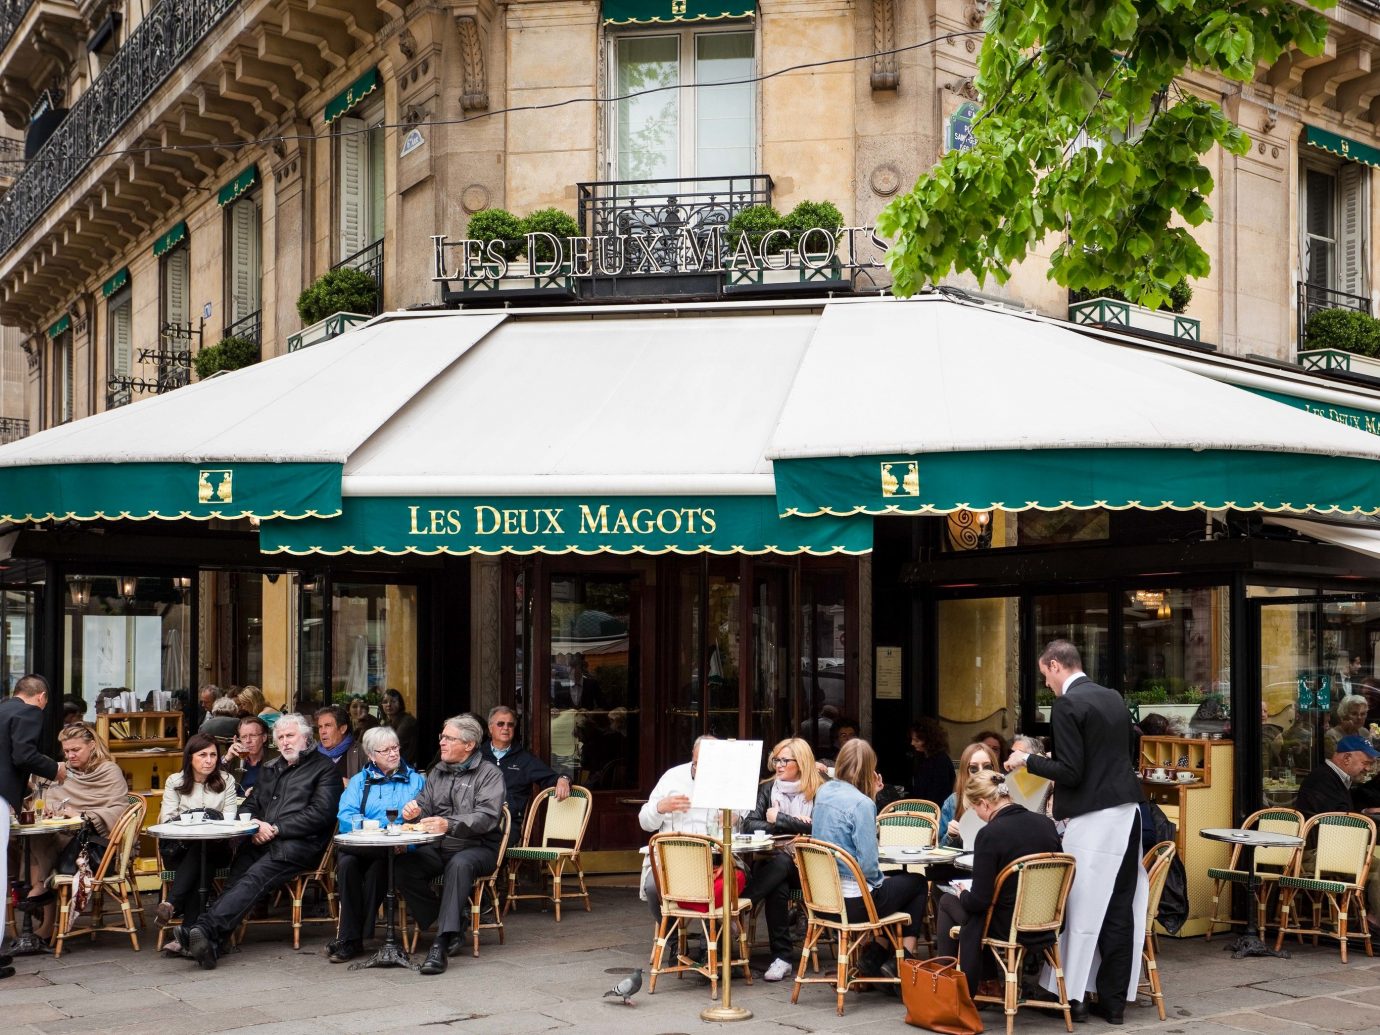 15 of the Most Romantic Things to Do in Paris | Jetsetter